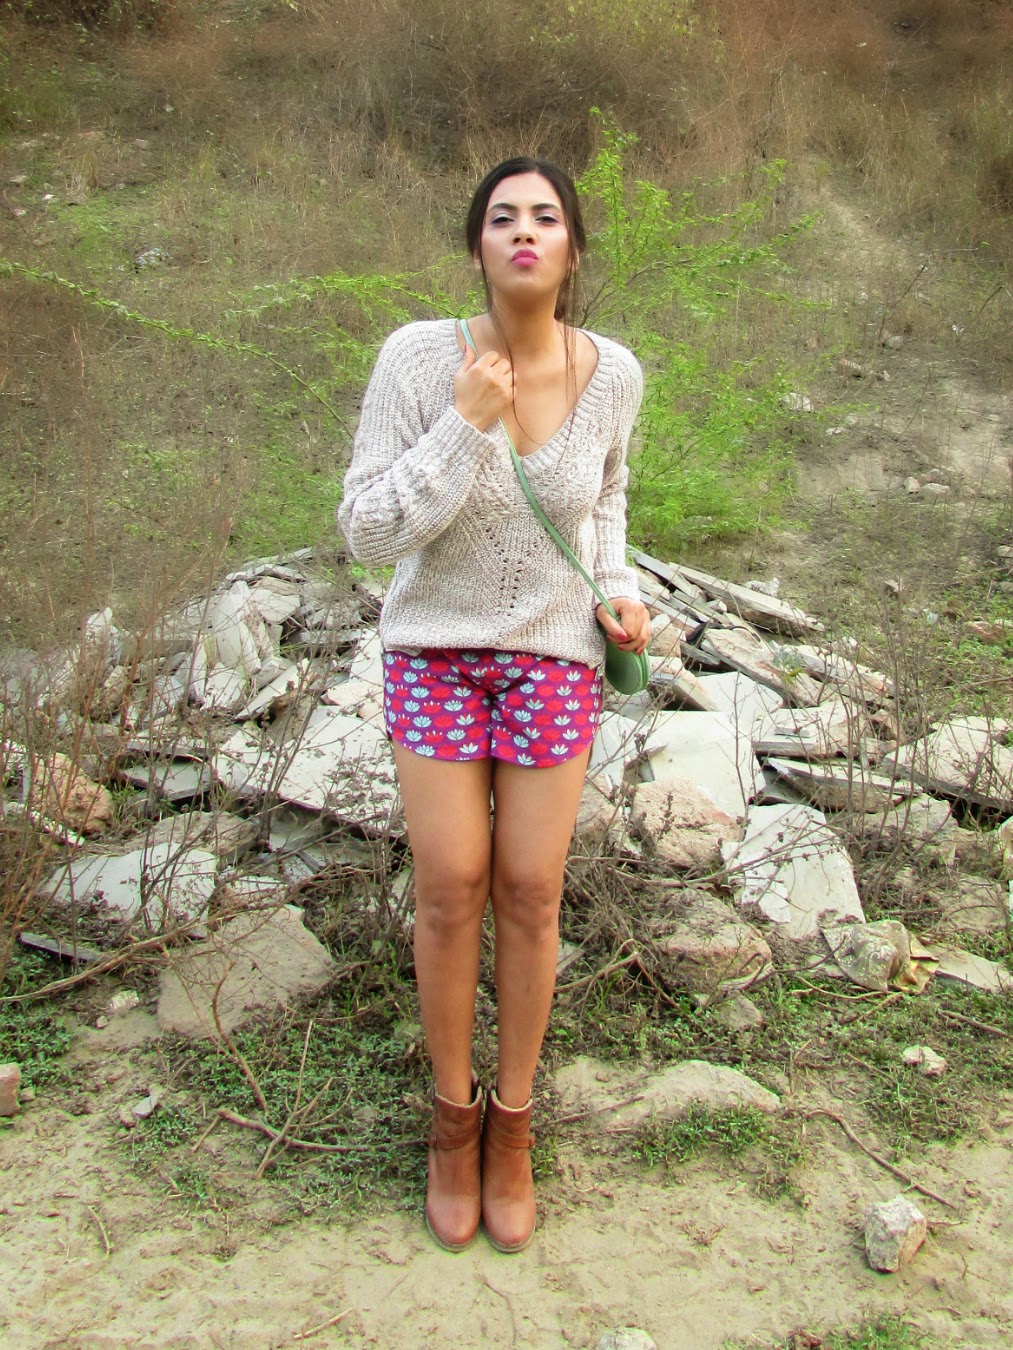 how to style shorts for winter, indiacircus, shorts, lotus shorts, cotton printed shorts, cheap shorts india online, lilac makeup, indiacircus review, ankle boots, colorful shorts, comfortable shorts, modern indian print, fusion shorts, indian fashion blog, Statement necklace, necklace, statement necklaces, big necklace, heavy necklaces , gold necklace, silver necklace, silver statement necklace, gold statement necklace, studded statement necklace , studded necklace, stone studded necklace, stone necklace, stove studded statement necklace, stone statement necklace, stone studded gold statement necklace, stone studded silver statement necklace, black stone necklace, black stone studded statement necklace, black stone necklace, black stone statement necklace, neon statement necklace, neon stone statement necklace, black and silver necklace, black and gold necklace, blank and silver statement necklace, black and gold statement necklace, silver jewellery, gold jewellery, stove jewellery, stone studded jewellery, imitation jewellery, artificial jewellery, junk jewellery, cheap jewellery ,indiacircus Statement necklace, indiacircus necklace, indiacircus statement necklaces,indiacircus big necklace, indiacircus heavy necklaces , indiacircus gold necklace, indiacircus silver necklace, indiacircus silver statement necklace,indiacircus gold statement necklace, indiacircus studded statement necklace , indiacircus studded necklace, indiacircus stone studded necklace, indiacircus stone necklace, indiacircus stove studded statement necklace, indiacircus stone statement necklace, indiacircus stone studded gold statement necklace, indiacircus stone studded silver statement necklace, indiacircus black stone necklace, indiacircus black stone studded statement necklace, indiacircus black stone necklace, indiacircus black stone statement necklace, indiacircus neon statement necklace, indiacircus neon stone statement necklace, indiacircus black and silver necklace, indiacircus black and gold necklace, indiacircus black  and silver statement necklace, indiacircus black and gold statement necklace, silver jewellery, indiacircus gold jewellery, eyeboxs stove jewellery, indiacircus stone studded jewellery, indiacircus imitation jewellery, indiacircus artificial jewellery, indiacircus junk jewellery, indiacircus cheap jewellery ,Cheap Statement necklace, Cheap necklace, Cheap statement necklaces,Cheap big necklace, Cheap heavy necklaces , Cheap gold necklace, Cheap silver necklace, Cheap silver statement necklace,Cheap gold statement necklace, Cheap studded statement necklace , Cheap studded necklace, Cheap stone studded necklace, Cheap stone necklace, Cheap stove studded statement necklace, Cheap stone statement necklace, Cheap stone studded gold statement necklace, Cheap stone studded silver statement necklace, Cheap black stone necklace, Cheap black stone studded statement necklace, Cheap black stone necklace, Cheap black stone statement necklace, Cheap neon statement necklace, Cheap neon stone statement necklace, Cheap black and silver necklace, Cheap black and gold necklace, Cheap black  and silver statement necklace, Cheap black and gold statement necklace, silver jewellery, Cheap gold jewellery, Cheap stove jewellery, Cheap stone studded jewellery, Cheap imitation jewellery, Cheap artificial jewellery, Cheap junk jewellery, Cheap cheap jewellery , Black pullover, black and grey pullover, black and white pullover, back cutout, back cutout pullover, back cutout sweater, back cutout jacket, back cutout top, back cutout tee, back cutout tee shirt, back cutout shirt, back cutout dress, back cutout trend, back cutout summer dress, back cutout spring dress, back cutout winter dress, High low pullover, High low sweater, High low jacket, High low top, High low tee, High low tee shirt, High low shirt, High low dress, High low trend, High low summer dress, High low spring dress, High low winter dress,indiacircus Black pullover, indiacircus black and grey pullover, indiacircus black and white pullover, indiacircus back cutout, indiacircus back cutout pullover, indiacircus back cutout sweater, indiacircus back cutout jacket, indiacircus back cutout top, indiacircus back cutout tee, indiacircus back cutout tee shirt, indiacircus back cutout shirt, indiacircus back cutout dress, I indiacircus back cutout trend, indiacircus back cutout summer dress, indiacircus back cutout spring dress, indiacircus back cutout winter dress, indiacircus High low pullover, indiacircus High low sweater, indiacircus High low jacket, indiacircus High low top, indiacircus High low tee, indiacircus High low tee shirt, indiacircus High low shirt, indiacircus High low dress, indiacircus High low trend, indiacircus High low summer dress, indiacircus High low spring dress, indiacircus High low winter dress, Cropped, cropped tee,cropped tee shirt , cropped shirt, cropped sweater, cropped pullover, cropped cardigan, cropped top, cropped tank top, Cheap Cropped, cheap cropped tee,cheap cropped tee shirt ,cheap  cropped shirt, cheap cropped sweater, cheap cropped pullover, cheap cropped cardigan,cheap  cropped top, cheap cropped tank top,eyeboxs Cropped, indiacircus cropped tee, indiacircus cropped tee shirt , indiacircus cropped shirt, indiacircus cropped sweater, indiacircus cropped pullover, indiacircus cropped cardigan, indiacircus cropped top, indiacircus cropped  top, winter Cropped, winter cropped tee, winter cropped tee shirt , winter cropped shirt, winter cropped sweater, winter cropped pullover, winter cropped cardigan, winter cropped top, winter cropped tank top,Leggings, winter leggings, warm leggings, winter warm leggings, fall leggings, fall warm leggings, tights, warm tights, winter tights, winter warm tights, fall tights, fall warm tights,indiacircus leggings, indiacircus tights, warm warm leggings, indiacircus warm tights, indiacircus winter warm tights, indiacircus fall warm tights, woollen tights , woollen leggings, eyeboxs woollen tights, indiacircus woollen leggings, woollen bottoms, indiacircus woollen bottoms, indiacircus woollen pants, woollen pants,Christmas , Christmas leggings, Christmas tights, lovelyshoes Christmas, lovelyshoes Christmas clothes, clothes for Christmas , eyeboxs Christmas leggings, eyeboxs Christmas tights, eyeboxs warm Christmas leggings, eyeboxs warm Christmas  tights, eyeboxs snowflake leggings, snowflake leggings, snowflake tights, eyeboxs rain deer tights, eyeboxs rain deer leggings, ugly Christmas sweater, Christmas tree, Christmas clothes, Santa clause,Wishlist, clothes wishlist, indiacircus wishlist, indiacircus, indiacircus.net , indiacircus wishlist, autumn wishlist,autumn indiacircus wishlist, indiacircus.com,autumn clothes wishlist, autumn shoes wishlist, autumn bags wishlist, autumn boots wishlist, autumn pullovers wishlist, autumn cardigans wishlist, autymn coats wishlist, indiacircus clothes wishlist, indiacircus bags wishlist, indiacircus bags wishlist, indiacircus boots wishlist, indiacircus pullover wishlist, indiacircus cardigans wishlist, indiacircus autum clothes wishlist, winter clothes, wibter clothes wishlist, winter wishlist, wibter pullover wishlist, winter bags wishlist, winter boots wishlist, winter cardigans wishlist, winter leggings wishlist, indiacircus winter clothes, indiacircus autumn clothes, indiacircus winter collection,indiacircus autumn collection,Cheap clothes online,cheap dresses online, cheap jumpsuites online, cheap leggings online, cheap shoes online, cheap wedges online , cheap skirts online, cheap jewellery online, cheap jackets online, cheap jeans online, cheap maxi online, cheap makeup online, cheap cardigans online, cheap accessories online, cheap coats online,cheap brushes online,cheap tops online, chines clothes online, Chinese clothes,Chinese jewellery ,Chinese jewellery online,Chinese heels online,Chinese electronics online,Chinese garments,Chinese garments online,Chinese products,Chinese products online,Chinese accessories online,Chinese inline clothing shop,Chinese online shop,Chinese online shoes shop,Chinese online jewellery shop,Chinese cheap clothes online,Chinese  clothes shop online, korean online shop,korean garments,korean makeup,korean makeup shop,korean makeup online,korean online clothes,korean online shop,korean clothes shop online,korean dresses online,korean dresses online,cheap Chinese clothes,cheap korean clothes,cheap Chinese makeup,cheap korean makeup,cheap korean shopping ,cheap Chinese shopping,cheap Chinese online shopping,cheap korean online shopping,cheap Chinese shopping website,cheap korean shopping website, cheap online shopping,online shopping,how to shop online ,how to shop clothes online,how to shop shoes online,how to shop jewellery online,how to shop mens clothes online, mens shopping online,boys shopping online,boys jewellery online,mens online shopping,mens online shopping website,best Chinese shopping website, Chinese online shopping website for men,best online shopping website for women,best korean online shopping,best korean online shopping website,korean fashion,korean fashion for women,korean fashion for men,korean fashion for girls,korean fashion for boys,best chinese online shopping,best chinese shopping website,best chinese online shopping website,wholesale chinese shopping website,wholesale shopping website,chinese wholesale shopping online,chinese wholesale shopping, chinese online shopping on wholesale prices, clothes on wholesale prices,cholthes on wholesake prices,clothes online on wholesales prices,online shopping, online clothes shopping, online jewelry shopping,how to shop online, how to shop clothes online, how to shop earrings online, how to shop,skirts online, dresses online,jeans online, shorts online, tops online, blouses online,shop tops online, shop blouses online, shop skirts online, shop dresses online, shop botoms online, shop summer dresses online, shop bracelets online, shop earrings online, shop necklace online, shop rings online, shop highy low skirts online, shop sexy dresses onle, men's clothes online, men's shirts online,men's jeans online, mens.s jackets online, mens sweaters online, mens clothes, winter coats online, sweaters online, cardigens online,beauty , fashion,beauty and fashion,beauty blog, fashion blog , indian beauty blog,indian fashion blog, beauty and fashion blog, indian beauty and fashion blog, indian bloggers, indian beauty bloggers, indian fashion bloggers,indian bloggers online, top 10 indian bloggers, top indian bloggers,top 10 fashion bloggers, indian bloggers on blogspot,home remedies, how to,indiacircus online shopping,indiacircus online shopping review,indiacircus.com review,indiacircus online clothing store,indiacircus online chinese store,indiacircus online shopping,indiacircus site review,indiacircus.com site review, indiacircus Chines fashion, indiacircus , indiacircus.com, indiacircus clothing, indiacircus dresses, indiacircus shoes, indiacircus accessories,indiacircus men cloths ,indiacircus makeup, indiacircus helth products,indiacircus Chinese online shopping, indiacircus Chinese store, indiacircus online chinese shopping, indiacircus lchinese shopping online,indiacircus, indiacircus dresses, indiacircus clothes, indiacircus garments, indiacircus clothes, indiacircus skirts, indiacircus pants, indiacircus tops, indiacircus cardigans, indiacircus leggings, indiacircus fashion , indiacircus clothes fashion, indiacircus footwear, indiacircus fashion footwear, indiacircus jewellery, indiacircus fashion jewellery, indiacircus rings, indiacircus necklace, indiacircus bracelets, indiacircus earings,Autumn, fashion, indiacircus, wishlist,Winter,fall, fall abd winter, winter clothes , fall clothes, fall and winter clothes, fall jacket, winter jacket, fall and winter jacket, fall blazer, winter blazer, fall and winter blazer, fall coat , winter coat, falland winter coat, fall coverup, winter coverup, fall and winter coverup, outerwear, coat , jacket, blazer, fall outerwear, winter outerwear, fall and winter outerwear, woolen clothes, wollen coat, woolen blazer, woolen jacket, woolen outerwear, warm outerwear, warm jacket, warm coat, warm blazer, warm sweater, coat , white coat, white blazer, white coat, white woolen blazer, white coverup, white woolens, indiacircus online shopping review,indiacircus.com review,indiacircus online clothing store,indiacircus online chinese store,indiacircus online shopping,indiacircus site review, indiacircus.com site review, indiacircus Chines fashion, indiacircus, indiacircus.com, indiacircus clothing, indiacircus dresses, indiacircus shoes, indiacircus accessories,indiacircus men cloths ,indiacircus makeup, indiacircus helth products,indiacircus Chinese online shopping, indiacircus Chinese store, indiacircus online chinese shopping, indiacircus chinese shopping online,indiacircus, indiacircus dresses, indiacircus clothes, indiacircus garments, indiacircus clothes, indiacircus skirts, indiacircus pants, indiacircus tops, indiacircus cardigans, indiacircus leggings, indiacircus fashion , indiacircus clothes fashion, indiacircus footwear, indiacircus fashion footwear, indiacircus jewellery, indiacircus fashion jewellery, indiacircus rings, indiacircus necklace, indiacircus bracelets, indiacircus earings,latest fashion trends online, online shopping, online shopping in india, online shopping in india from america, best online shopping store , best fashion clothing store, best online fashion clothing store, best online jewellery store, best online footwear store, best online store, beat online store for clothes, best online store for footwear, best online store for jewellery, best online store for dresses, worldwide shipping free, free shipping worldwide, online store with free shipping worldwide,best online store with worldwide shipping free,low shipping cost, low shipping cost for shipping to india, low shipping cost for shipping to asia, low shipping cost for shipping to korea,Friendship day , friendship's day, happy friendship's day, friendship day outfit, friendship's day outfit, how to wear floral shorts, floral shorts, styling floral shorts, how to style floral shorts, how to wear shorts, how to style shorts, how to style style denim shorts, how to wear denim shorts,how to wear printed shorts, how to style printed shorts, printed shorts, denim shorts, how to style black shorts, how to wear black shorts, how to wear black shorts with black T-shirts, how to wear black T-shirt, how to style a black T-shirt, how to wear a plain black T-shirt, how to style black T-shirt,how to wear shorts and T-shirt, what to wear with floral shorts, what to wear with black floral shorts,how to wear all black outfit, what to wear on friendship day, what to wear on a date, what to wear on a lunch date, what to wear on lunch, what to wear to a friends house, what to wear on a friends get together, what to wear on friends coffee date , what to wear for coffee,beauty,Pink, pink pullover, pink sweater, pink jumpsuit, pink sweatshirt, neon pink, neon pink sweater, neon pink pullover, neon pink jumpsuit , neon pink cardigan, cardigan , pink cardigan, sweater, jumper, jumpsuit, pink jumper, neon pink jumper, pink jacket, neon pink jacket, winter clothes, oversized coat, oversized winter clothes, oversized pink coat, oversized coat, oversized jacket, indiacircus pink, indiacircus pink sweater, indiacircus pink jacket, indiacircus pink cardigan, indiacircus pink coat, indiacircus pink jumper, indiacircus neon pink, indiacircus neon pink jacket, indiacircus neon pink coat, indiacircus neon pink sweater, indiacircus neon pink jumper, indiacircus neon pink pullover, pink pullover, neon pink pullover,fur,furcoat,furjacket,furblazer,fur pullover,fur cardigan,front open fur coat,front open fur jacket,front open fur blazer,front open fur pullover,front open fur cardigan,real fur, real fur coat,real fur jacket,real fur blazer,real fur pullover,real fur cardigan, soft fur,soft fur coat,soft fur jacket,soft furblazer,soft fur pullover,sof fur cardigan, white fur,white fur coat,white fur jacket,white fur blazer, white fur pullover, white fur cardigan,trench, trench coat, trench coat online, trench coat india, trench coat online India, trench cost price, trench coat price online, trench coat online price, cheap trench coat, cheap trench coat online, cheap trench coat india, cheap trench coat online India, cheap trench coat , Chinese trench coat, Chinese coat, cheap Chinese trench coat, Korean coat, Korean trench coat, British coat, British trench coat, British trench coat online, British trench coat online, New York trench coat, New York trench coat online, cheap new your trench coat, American trench coat, American trench coat online, cheap American trench coat, low price trench coat, low price trench coat online , low price trench coat online india, low price trench coat india, indiacircus trench, indiacircus trench coat, indiacircus trench coat online, indiacircus trench coat india, indiacircus trench coat online India, indiacircus trench cost price,indiacircus trench coat price online, indiacircus trench coat online price, indiacircus cheap trench coat, indiacircus indiacircus trench coat online, indiacircus cheap trench coat india, indiacircus cheap trench coat online India, indiacircus cheap trench coat , indiacircus Chinese trench coat, indiacircus Chinese coat, indiacircus cheap Chinese trench coat, indiacircus Korean coat, indiacircus Korean trench coat, indiacircus British coat, indiacircus British trench coat, indiacircus British trench coat online, indiacircus British trench coat online, indiacircus New York trench coat, indiacircus New York trench coat online, indiacircus cheap new your trench coat, indiacircus American trench coat, indiacircus American trench coat online, indiacircus cheap American trench coat, indiacircus low price trench coat, indiacircus low price trench coat online , indiacircus low price trench coat online india, indiacircus low price trench coat india, how to wear trench coat, how to wear trench, how to style trench coat, how to style coats, how to style long coats, how to style winter coats, how to style winter trench coats, how to style winter long coats, how to style warm coats, how to style beige coat, how to style beige long coat, how to style beige trench coat, how to style beige coat, beige coat, beige long coat, beige long coat, beige frock coat, beige double breasted coat, double breasted coat, how to style frock coat, how to style double breasted coat, how to wear beige trench coat,how to wear beige coat, how to wear beige long coat, how to wear beige frock coat, how to wear beige double button coat, how to wear beige double breat coat, double button coat, what us trench coat, uses of trench coat, what is frock coat, uses of frock coat, what is long coat, uses of long coat, what is double breat coat, uses of double breasted coat, what is bouton up coat, uses of button up coat, what is double button coat, uses of double button coat, velvet leggings, velvet tights, velvet bottoms, embroided velvet leggings, embroided velvet tights, pattern tights, velvet pattern tights, floral tights , floral velvet tights, velvet floral tights, embroided  velvet leggings, pattern leggings , velvet pattern leggings , floral leggings , floral velvet leggings, velvet floral leggings ,eyeboxs velvet leggings, indiacircus velvet tights, indiacircus velvet bottoms,indiacircus embroided velvet leggings,indiacircus embroided velvet tights, indiacircus pattern tights, indiacircus velvet pattern tights, indiacircus floral tights , indiacircus floral velvet tights, indiacircus velvet floral tights, indiacircus embroided  velvet leggings, indiacircus pattern leggings , indiacircus velvet pattern leggings , indiacircus floral leggings ,indiacircus floral velvet leggings, indiacircus velvet floral leggings ,indiacircus studded heels, studded heels , stud heels, valentinos , valentino heels, valentine shoes, valentino studded shoes, valentino studded heels, valentino studded sandels, black valentino, valentino footwear ,shoe sale , valentino look alikes,india , indian , indianculure , indian trends , indian clothes , indian embriodaty , clutch , sling bag , designer , designer clutch , designer sling bag , designer bag , indiacircus , indiacircus.com , indiacircus review , indiacircus.com review , indiacircus coupon , indiacircus discount coupon , indiacircus discount, krsna , krsna metha , krsna metha designer , krsna metha designs , krsna metha clutch ,krsna metha indiacircus , spring bag , bag for spring , spring clutch ,